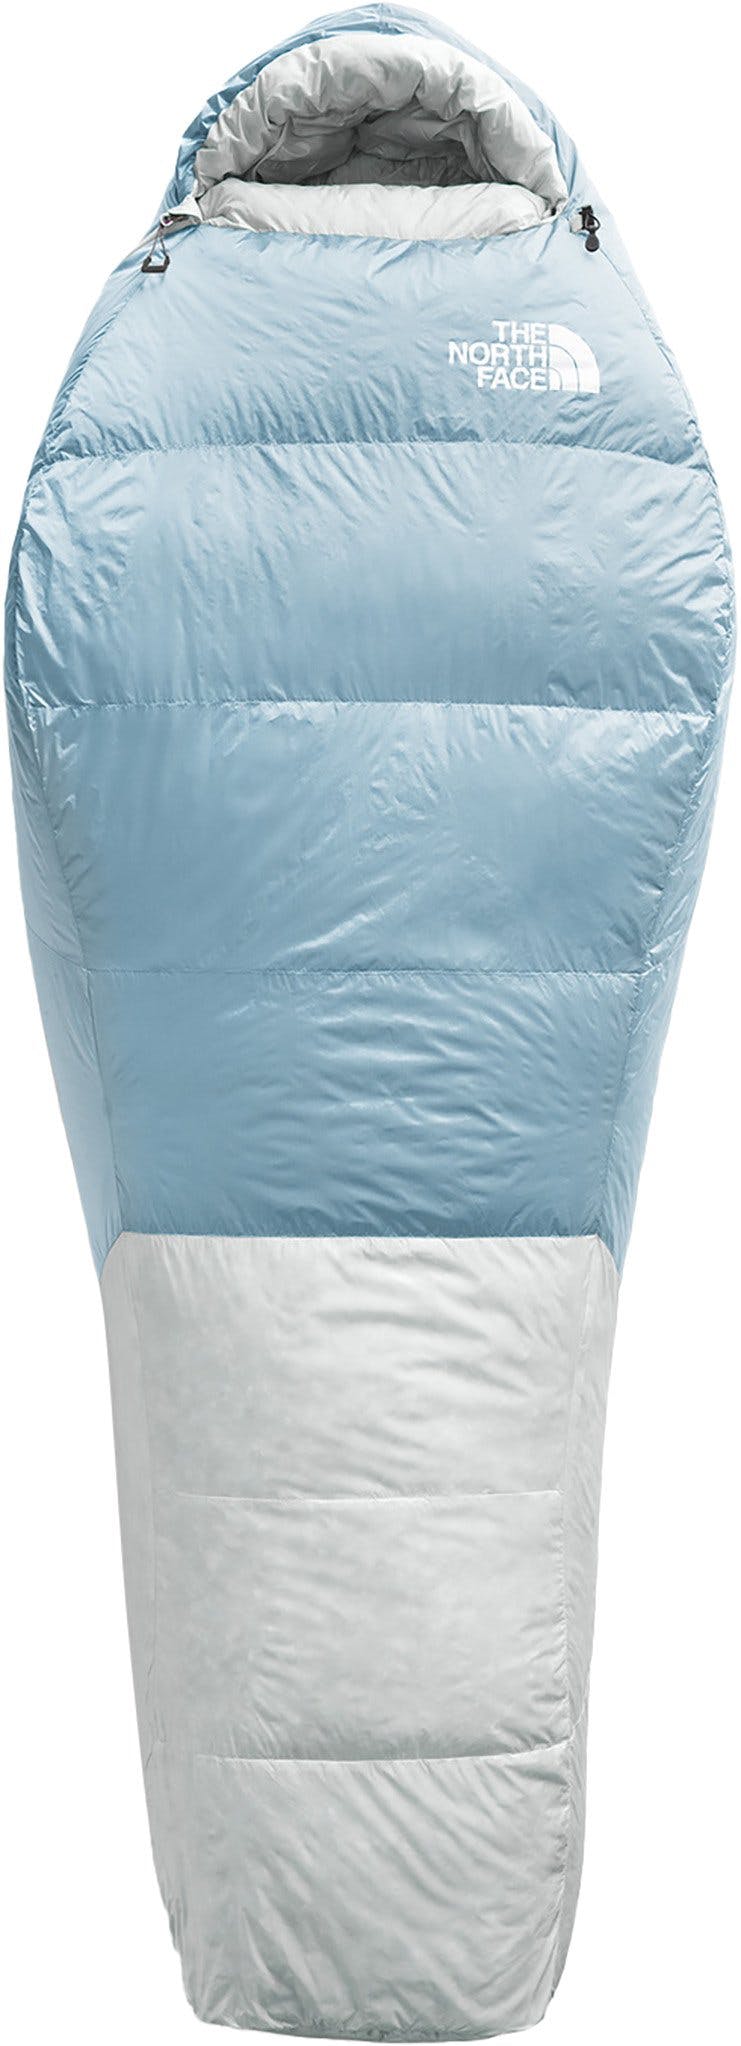 Product gallery image number 1 for product Blue Kazoo Eco Sleeping Bag -20°F/-7°C- Women's